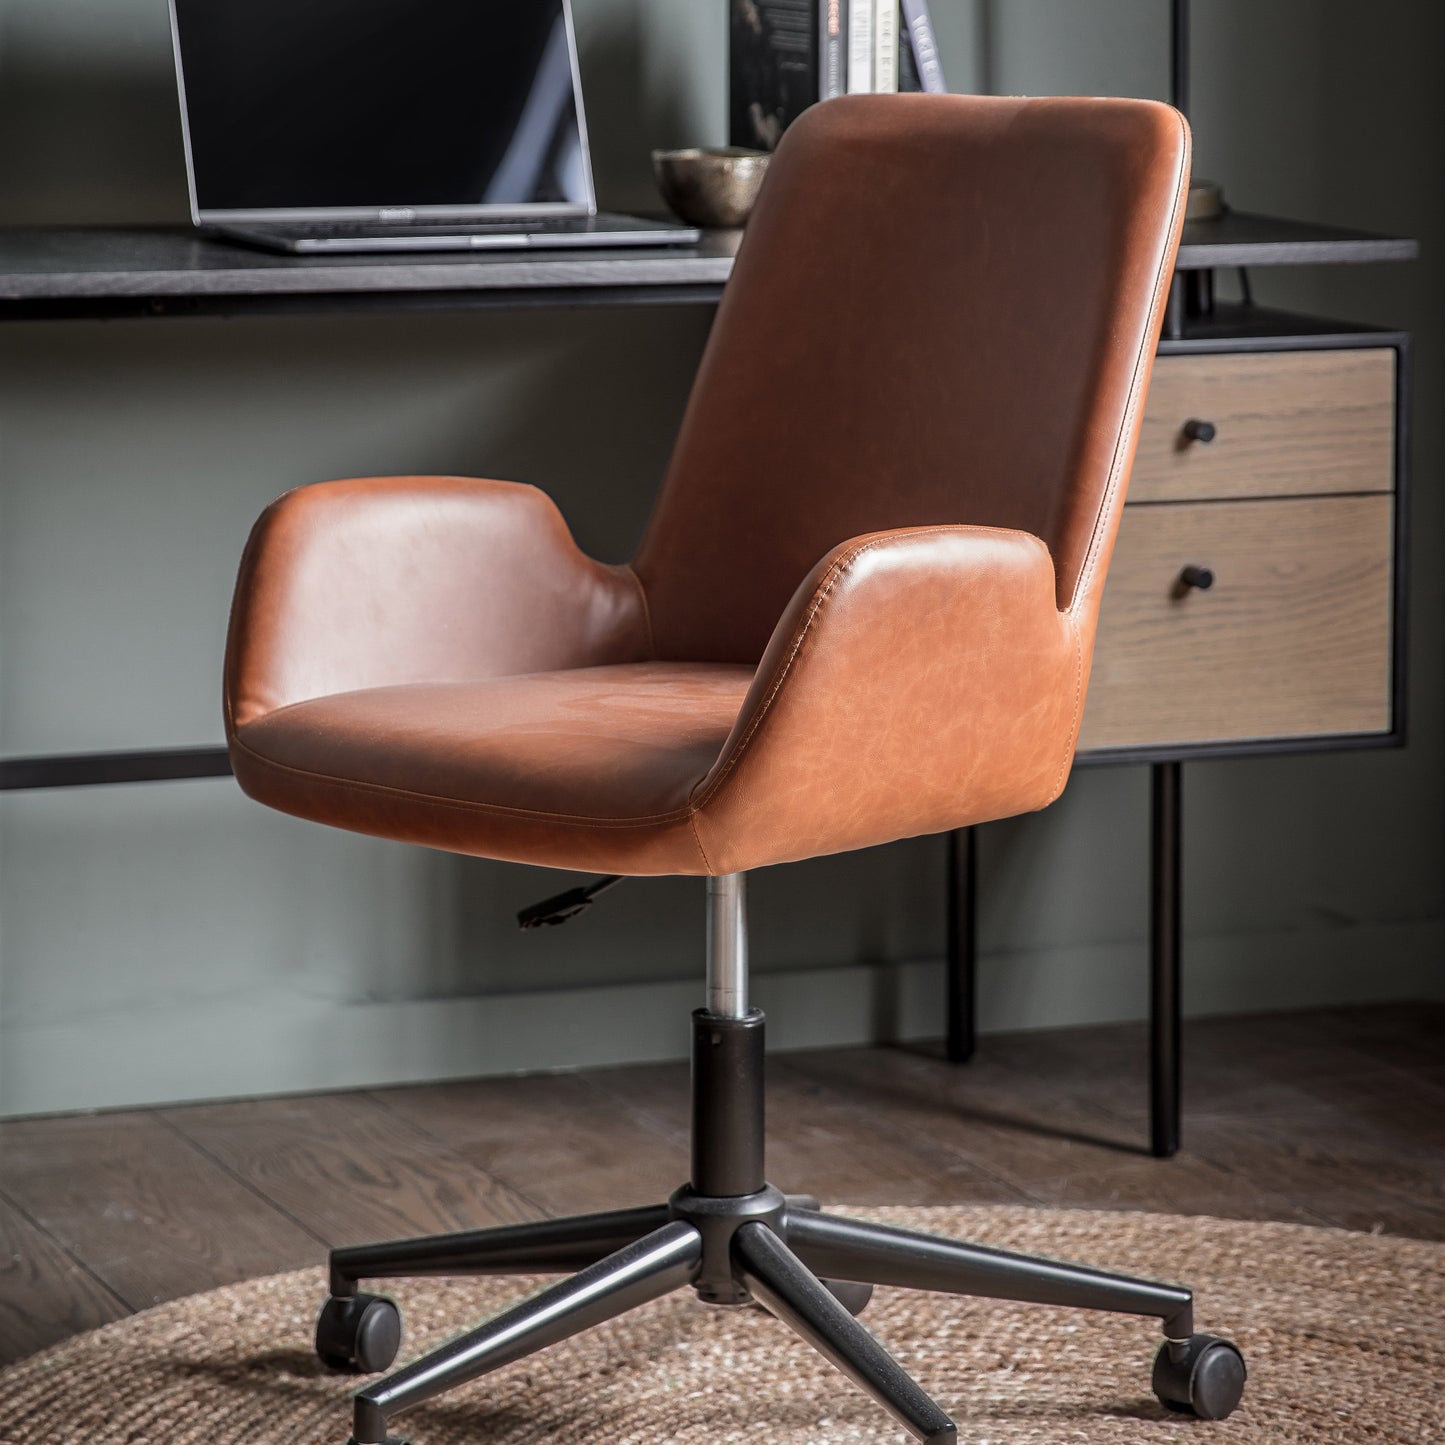 Load image into Gallery viewer, A Noss Swivel Chair Brown from Kikiathome.co.uk as a stylish addition to home furniture and interior decor.
